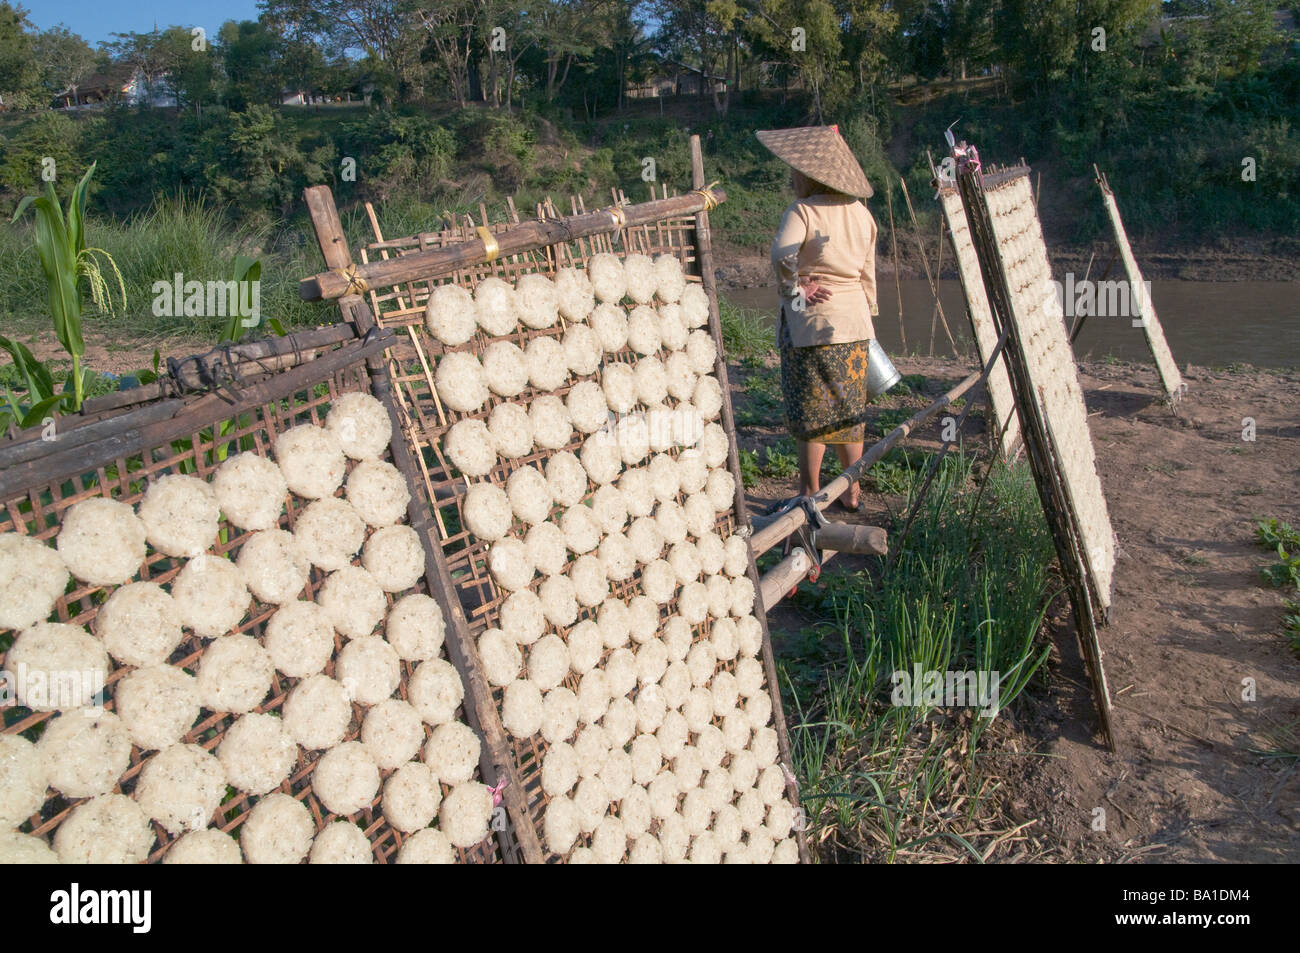 LAOS.RICE CAKES DRYING IN THE SUN IN A VILLAGE BY THE MEKONG RIVER Photo Julio Etchart Stock Photo